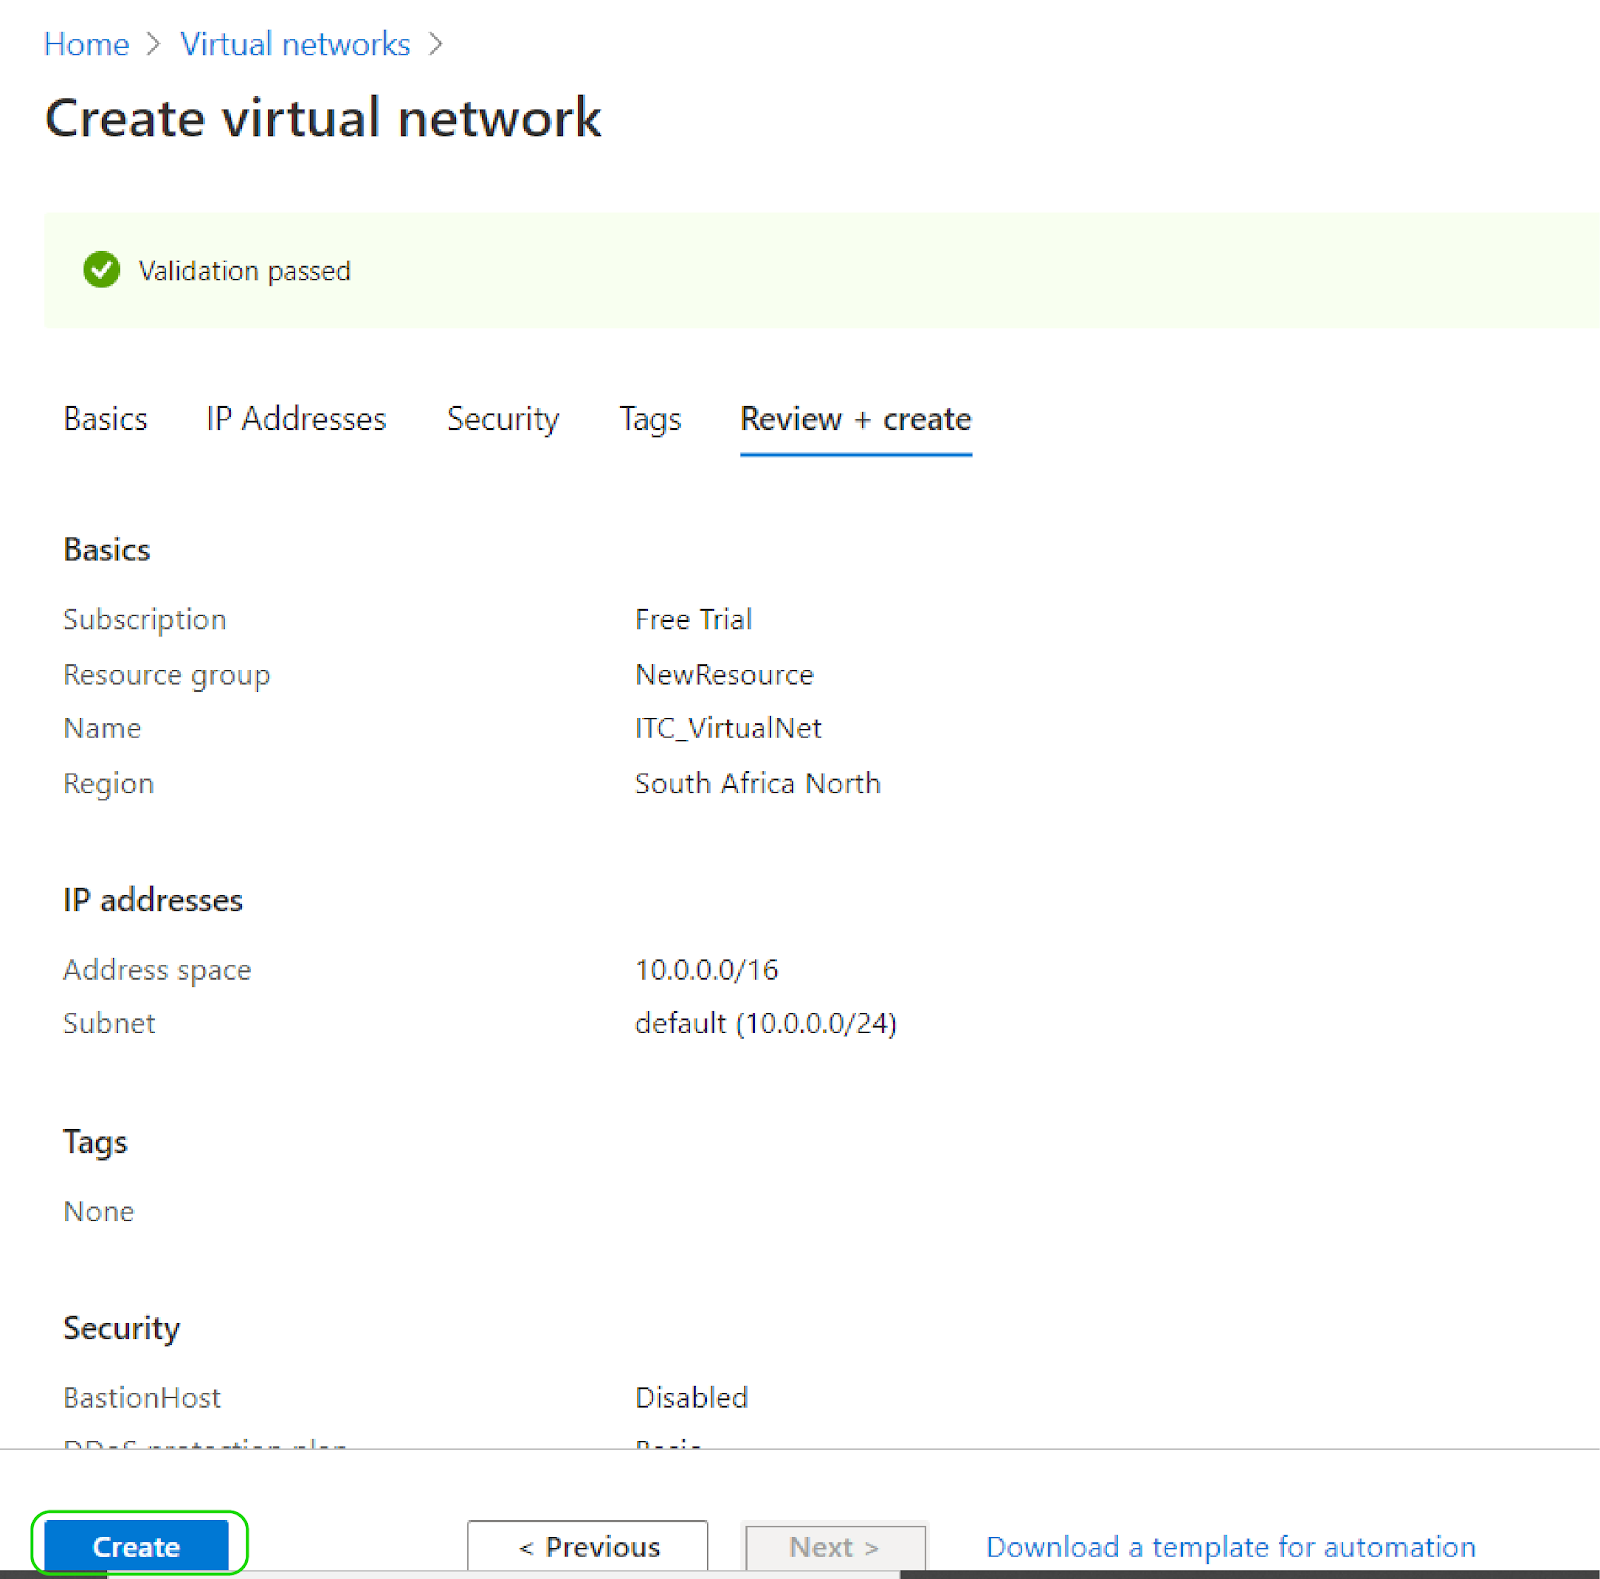 Creating a Virtual Network for Your Objects - Review + Create